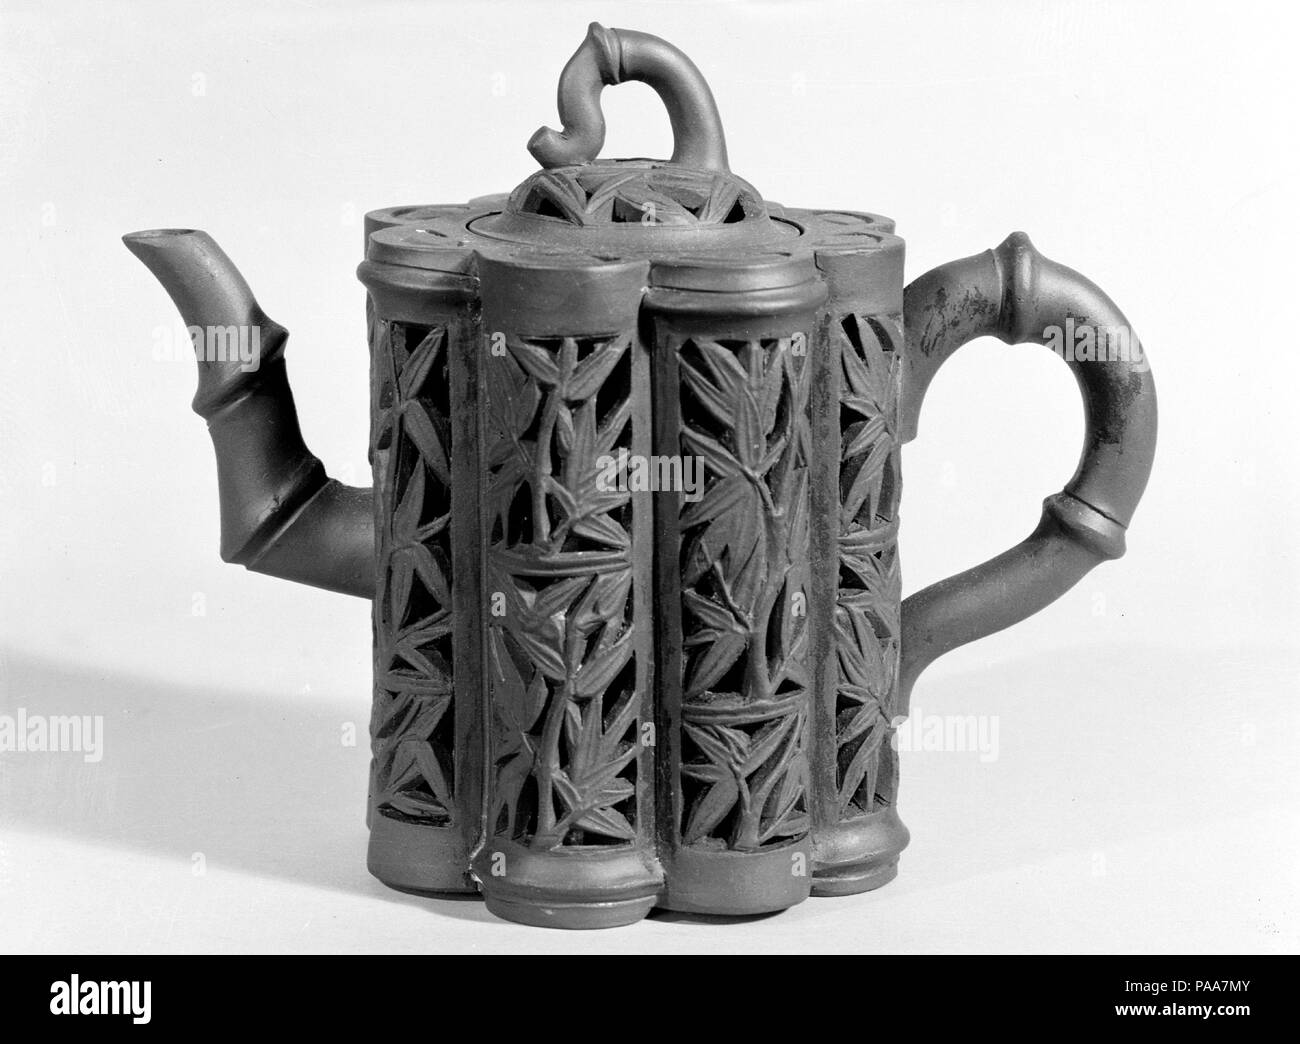 Teapot. Culture: China. Dimensions: H. incl. finial 5 in. (12.7 cm); H. w/o finial 3 3/4 in. (9.5 cm); W. from spout to handle 6 in. (15.2 cm); Diam. of base 3 3/8 in. (8.6 cm). Date: 19th century. Museum: Metropolitan Museum of Art, New York, USA. Stock Photo